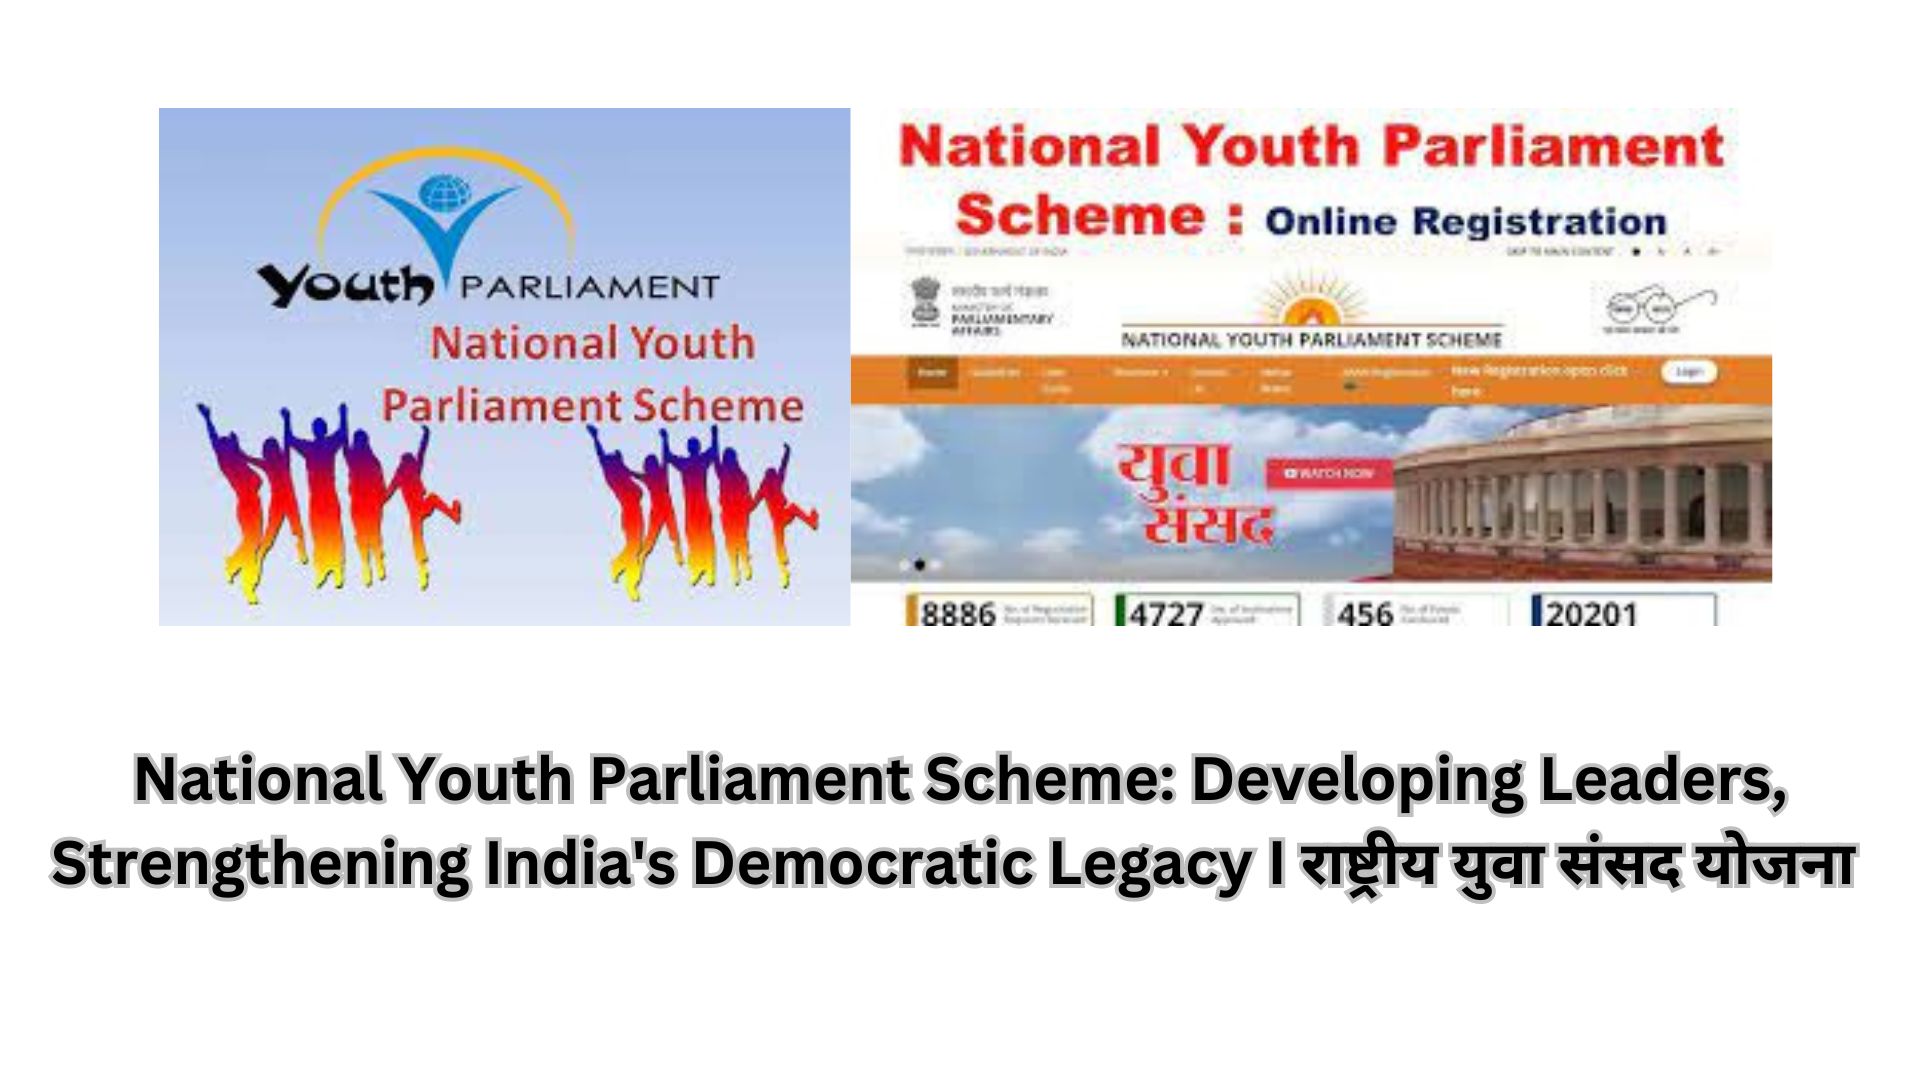 National Youth Parliament Scheme: Developing Leaders, Strengthening India's Democratic Legacy I राष्ट्रीय युवा संसद योजना -